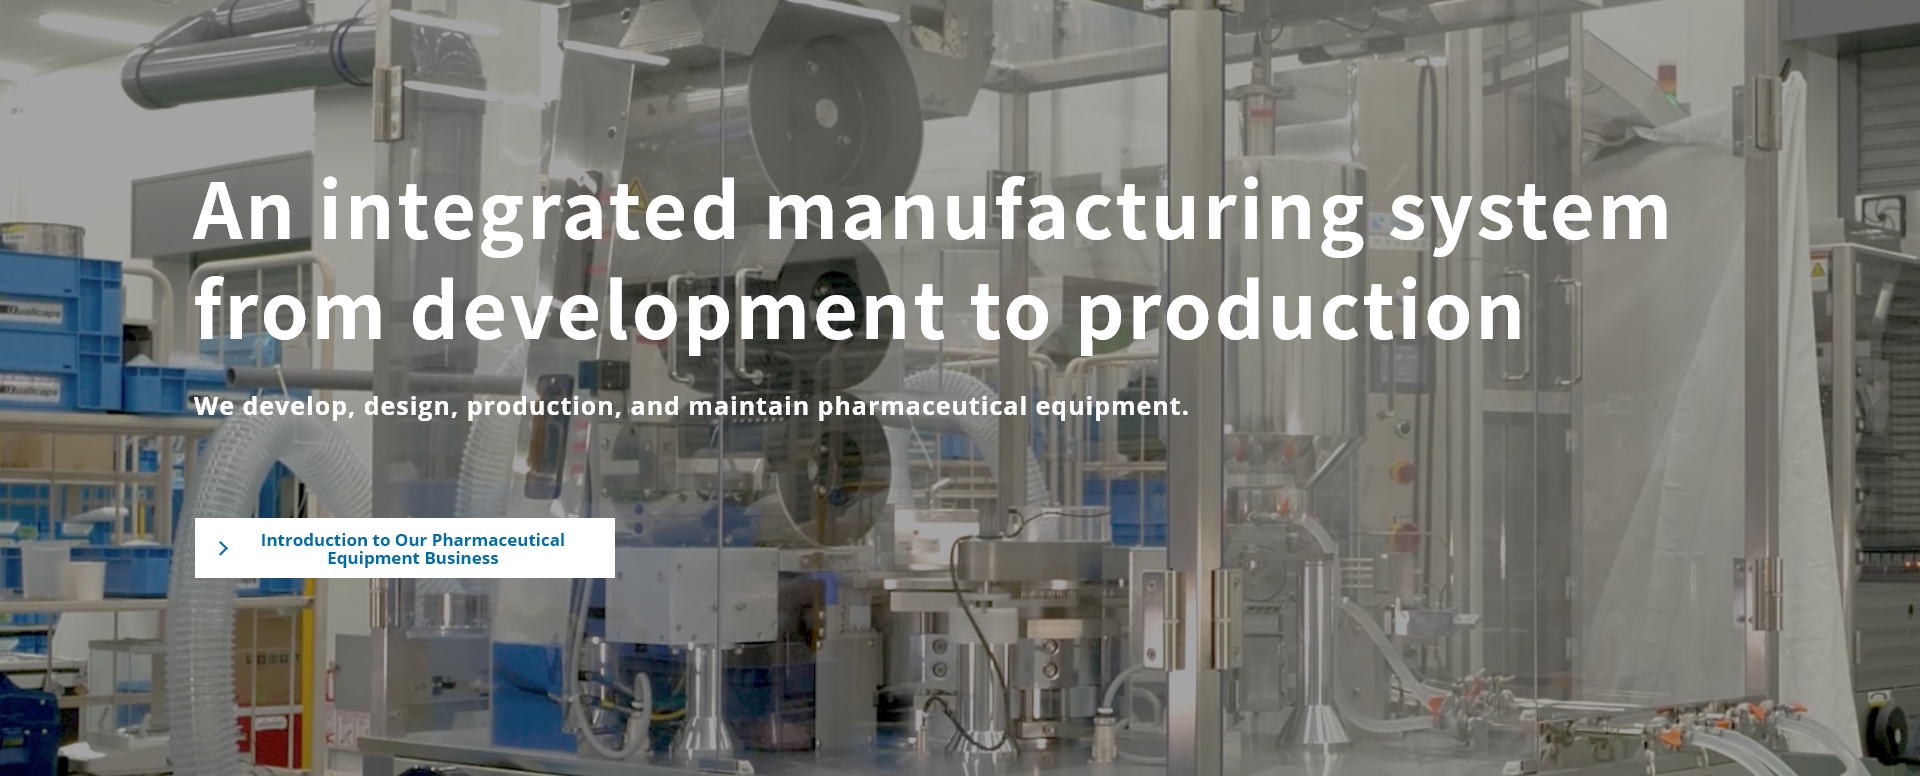 Introduction to Our Pharmaceutical Equipment Business